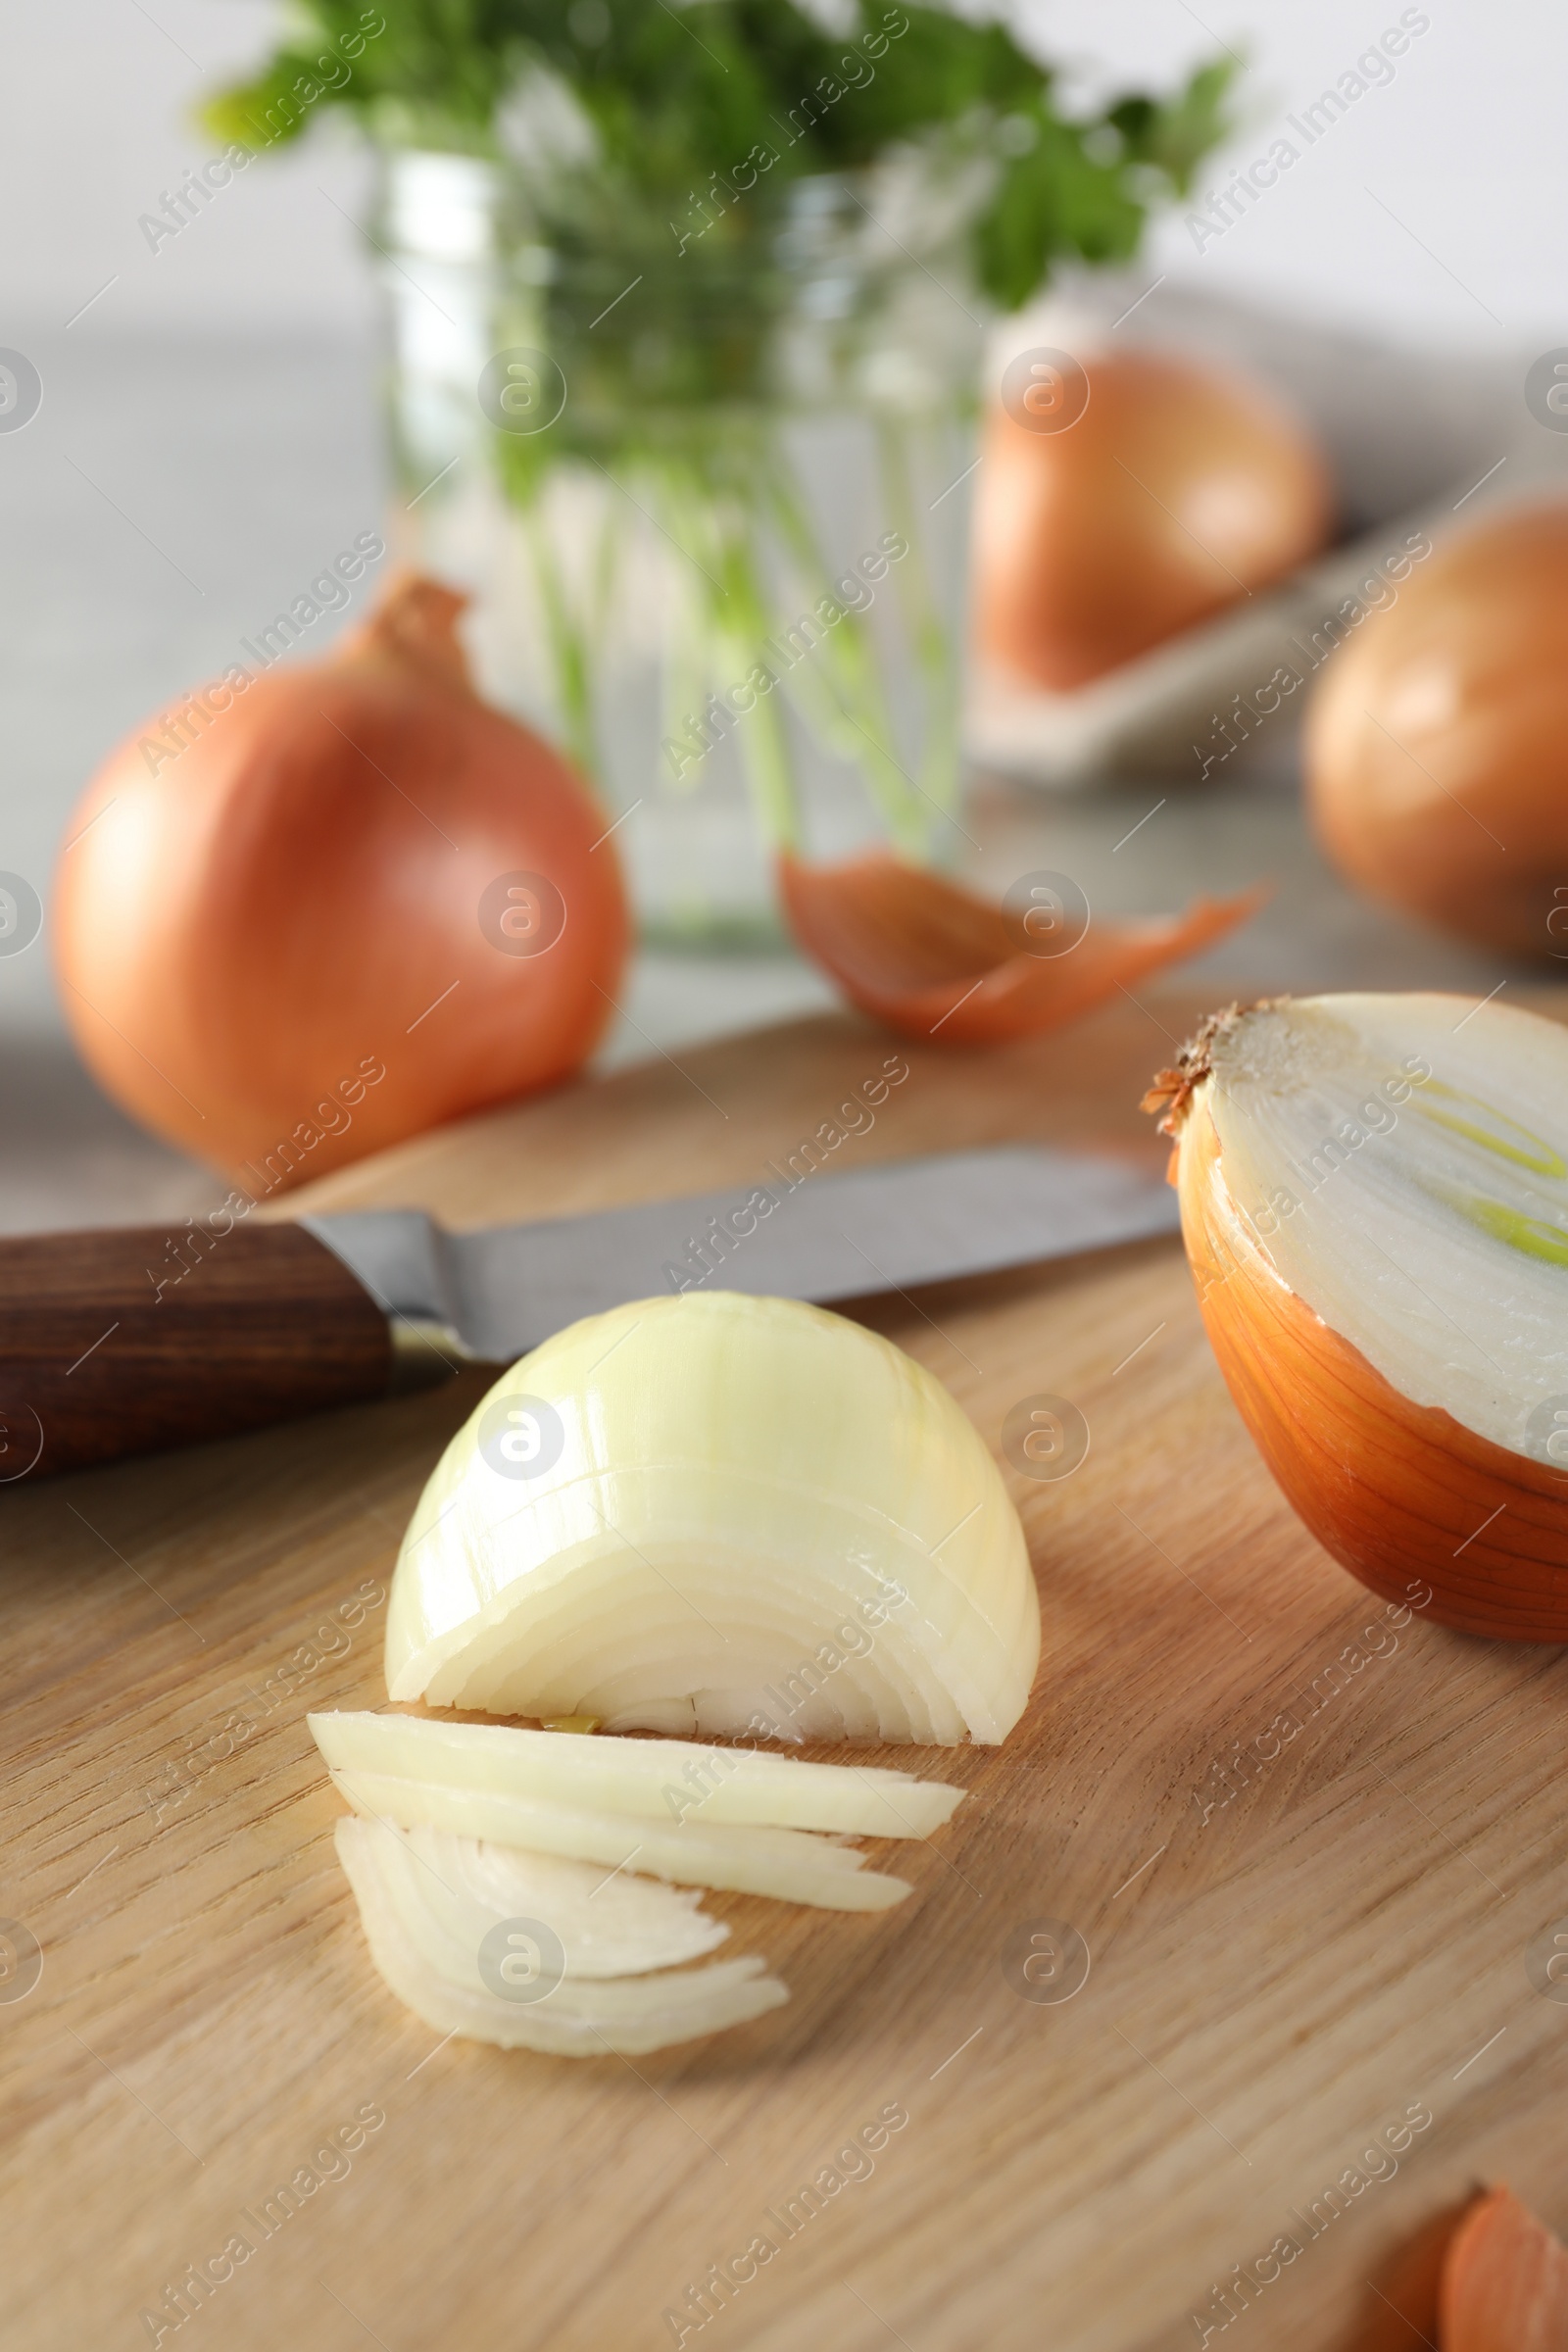 Photo of Whole and partially sliced onion on wooden table indoors